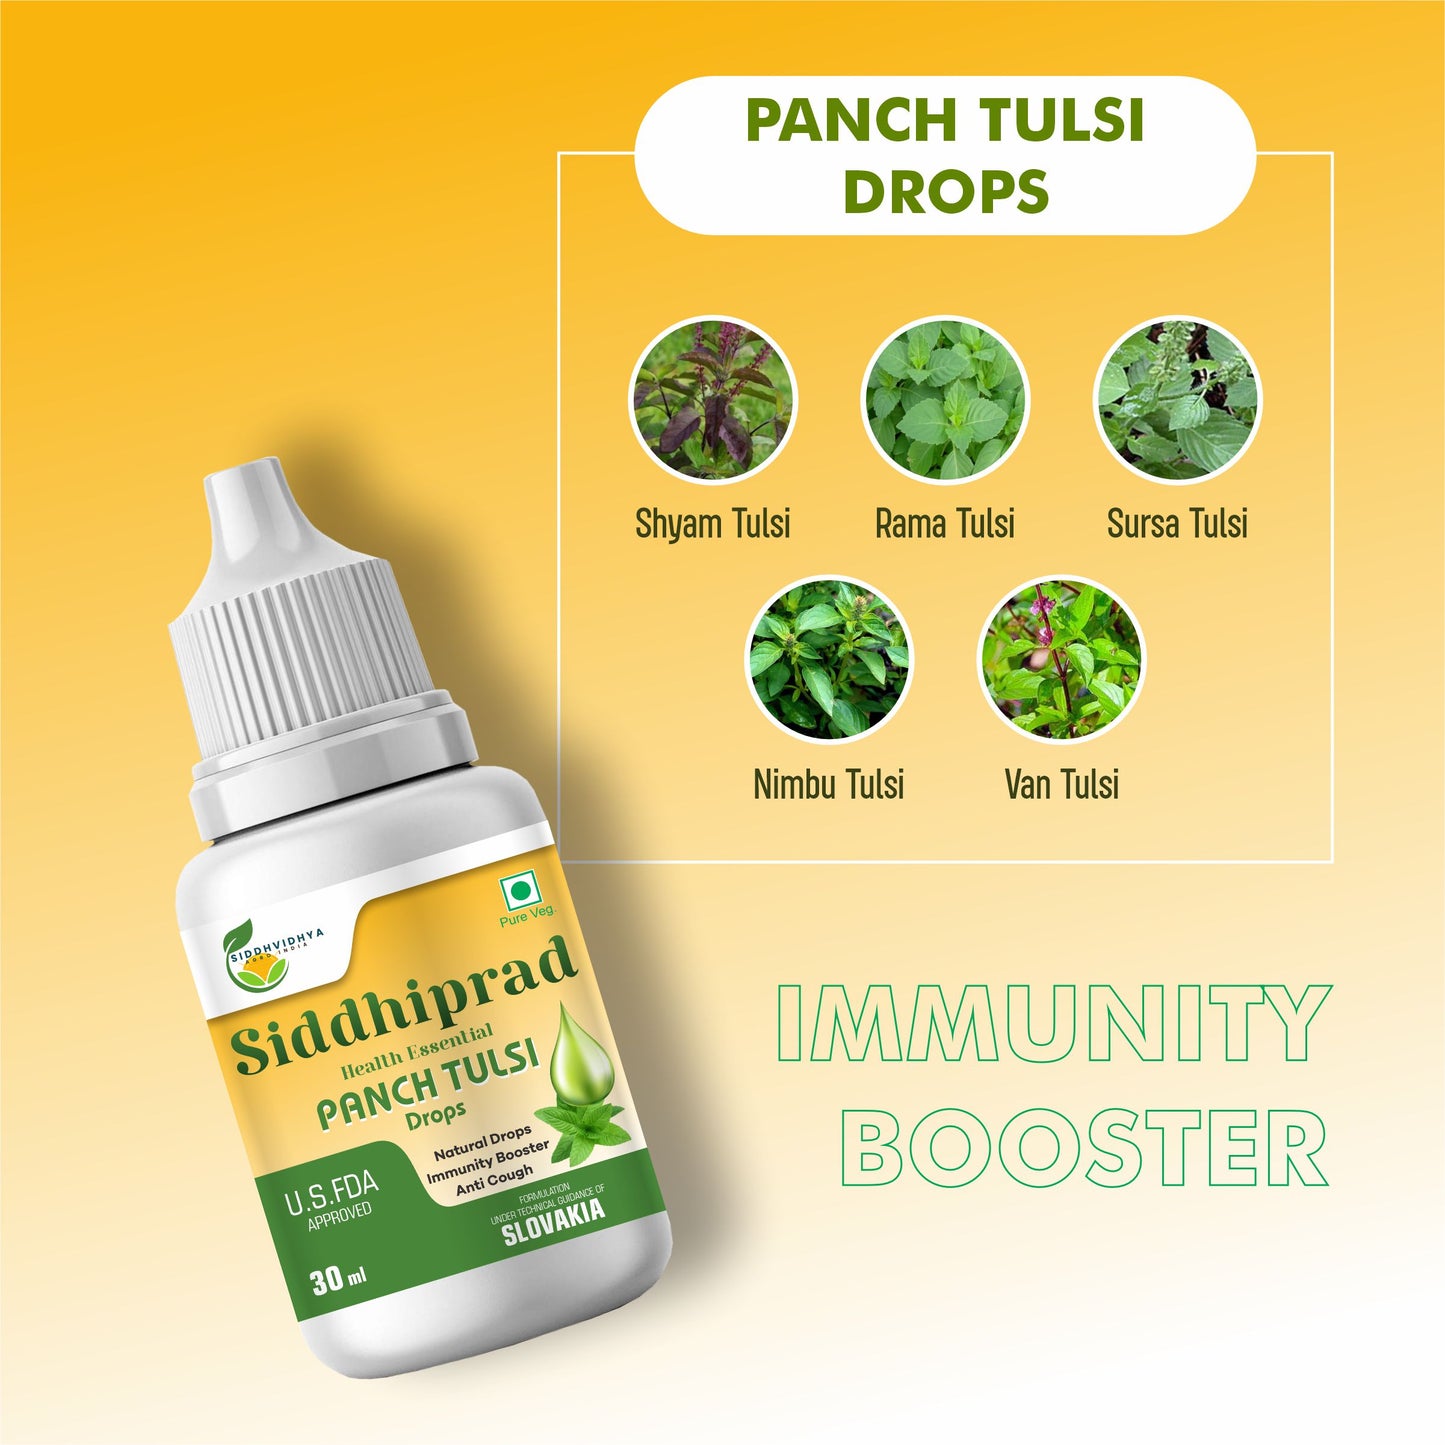 Panch Tulsi Drops with Extract of 5 Rare Tulsi plant For Immunity Booster, Herbal life, Smooth Skin & Healthy Hair, Oral Health, Controls Sugar, Digestion, Cough & Cold Relief (30ml)